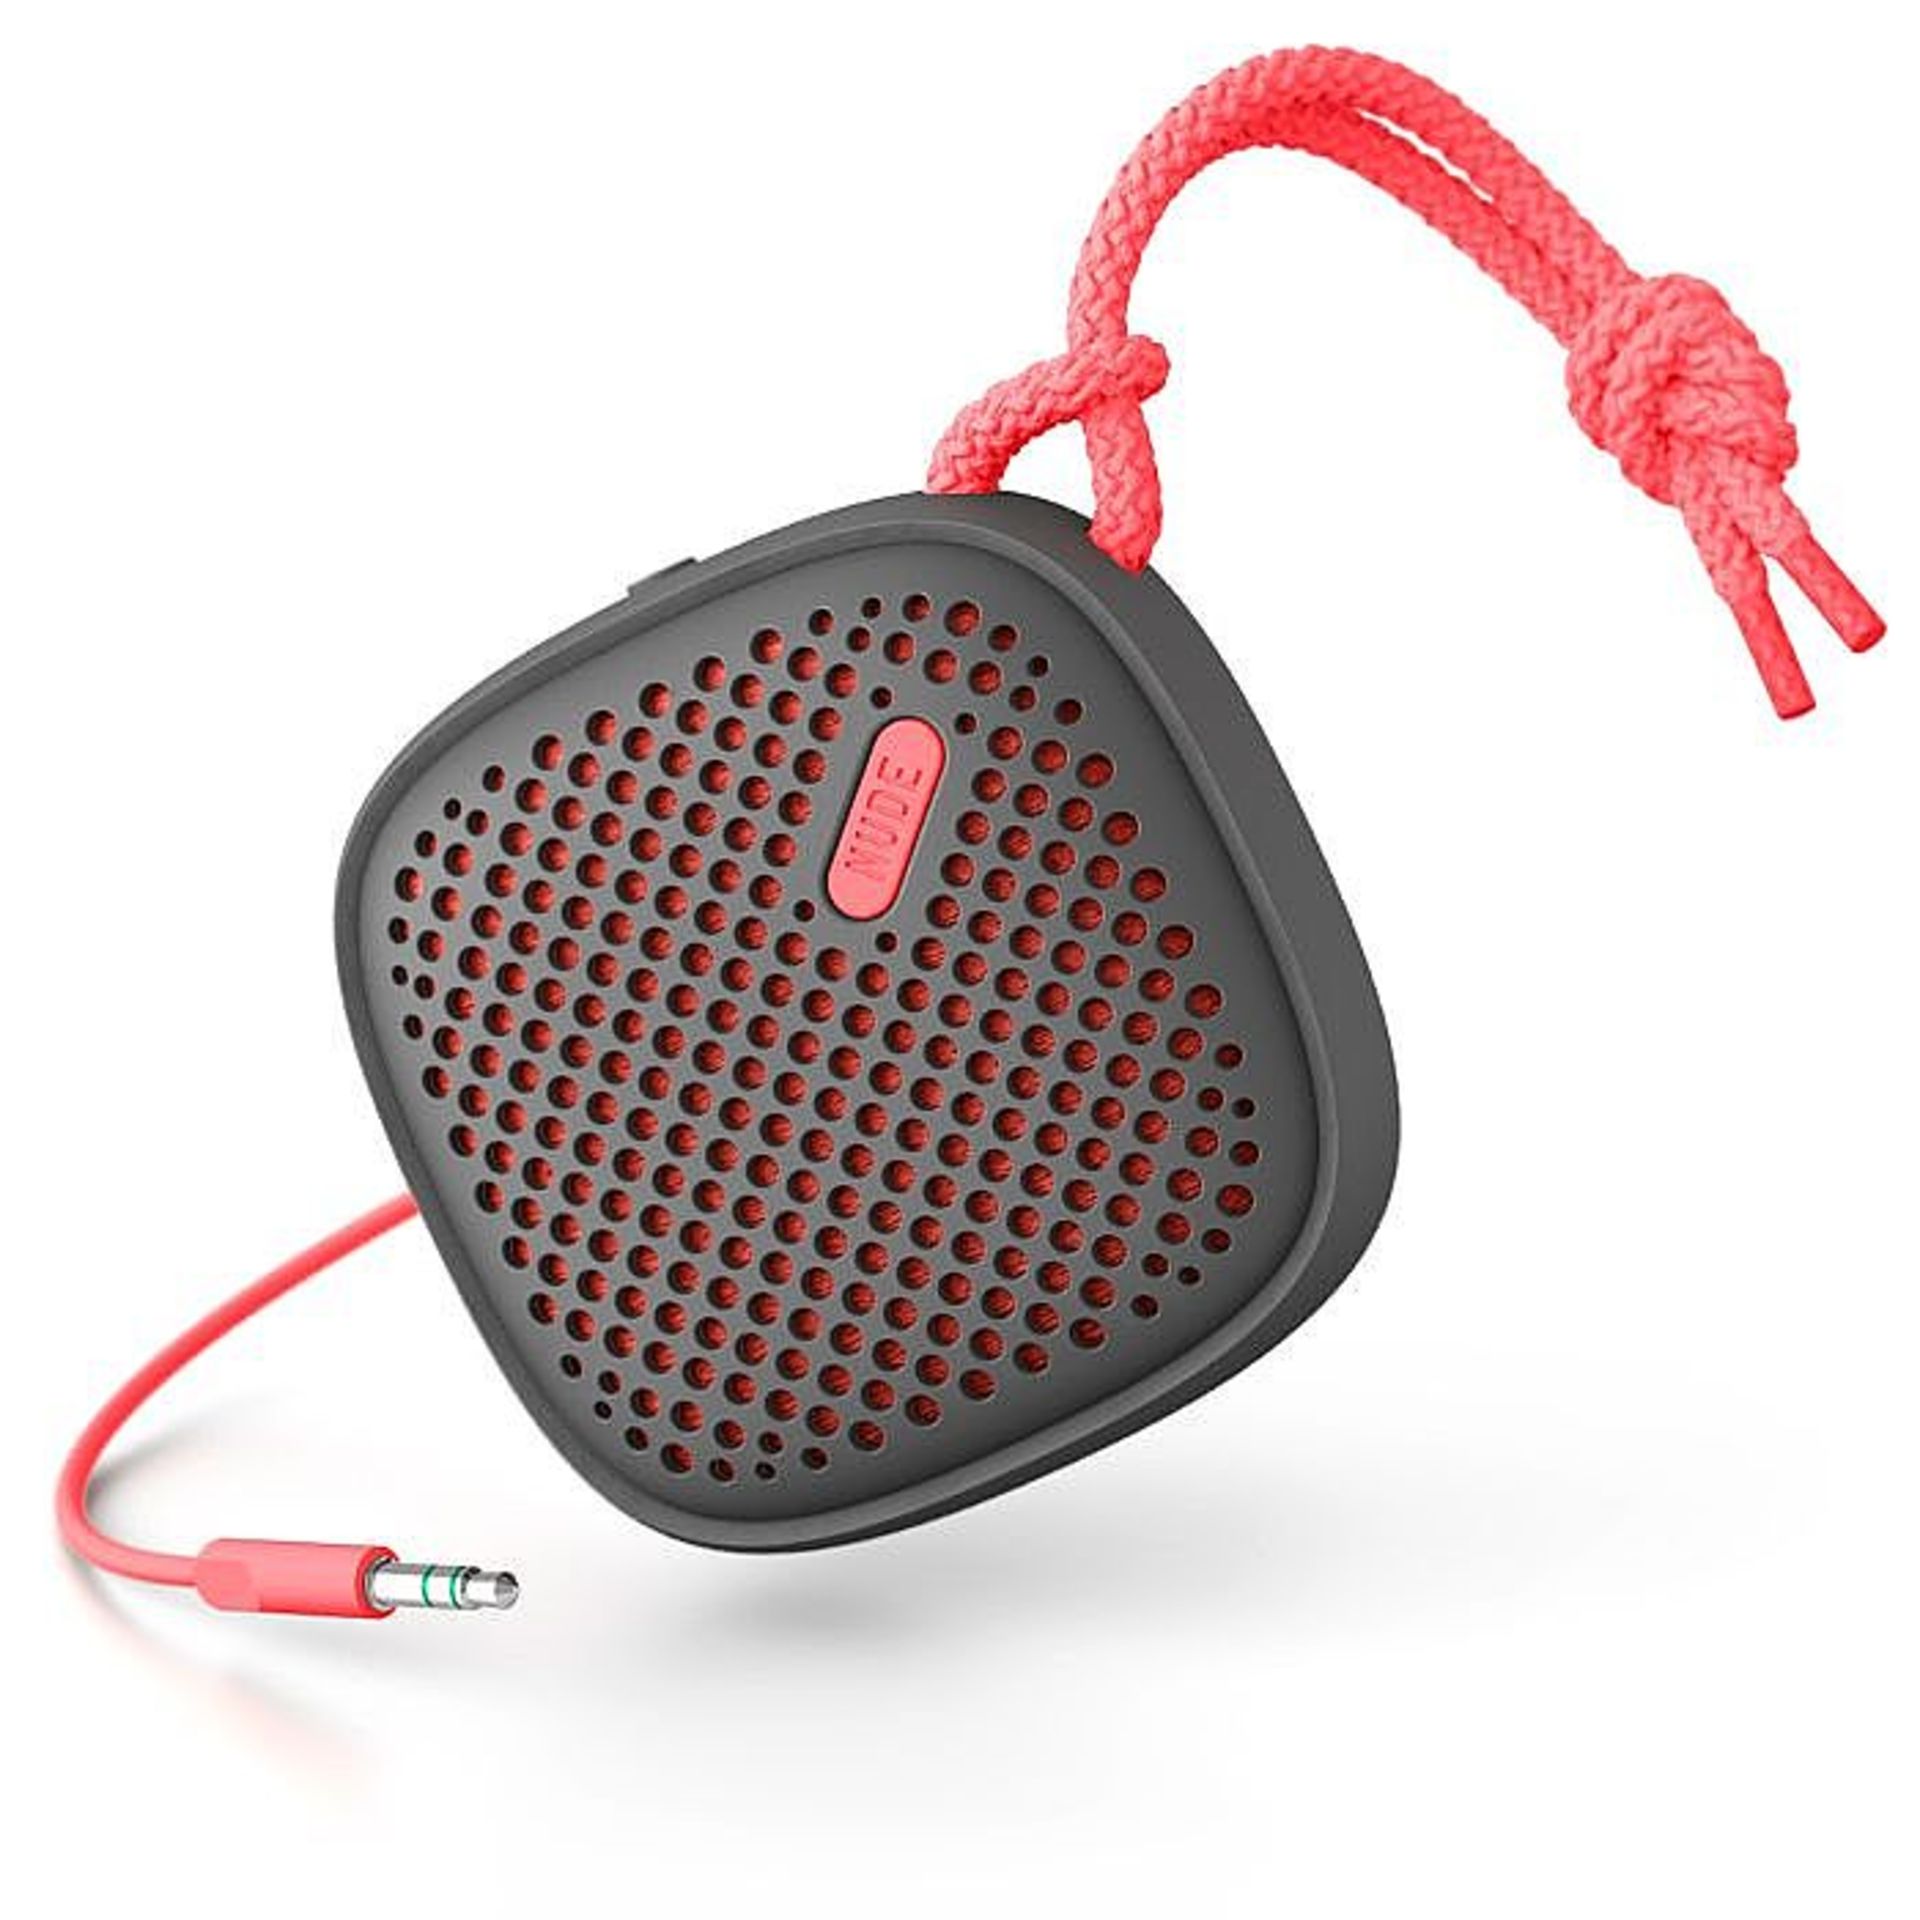 V Brand New Nude Audio Move S Wired Portable Speaker - Coral - Image 2 of 2